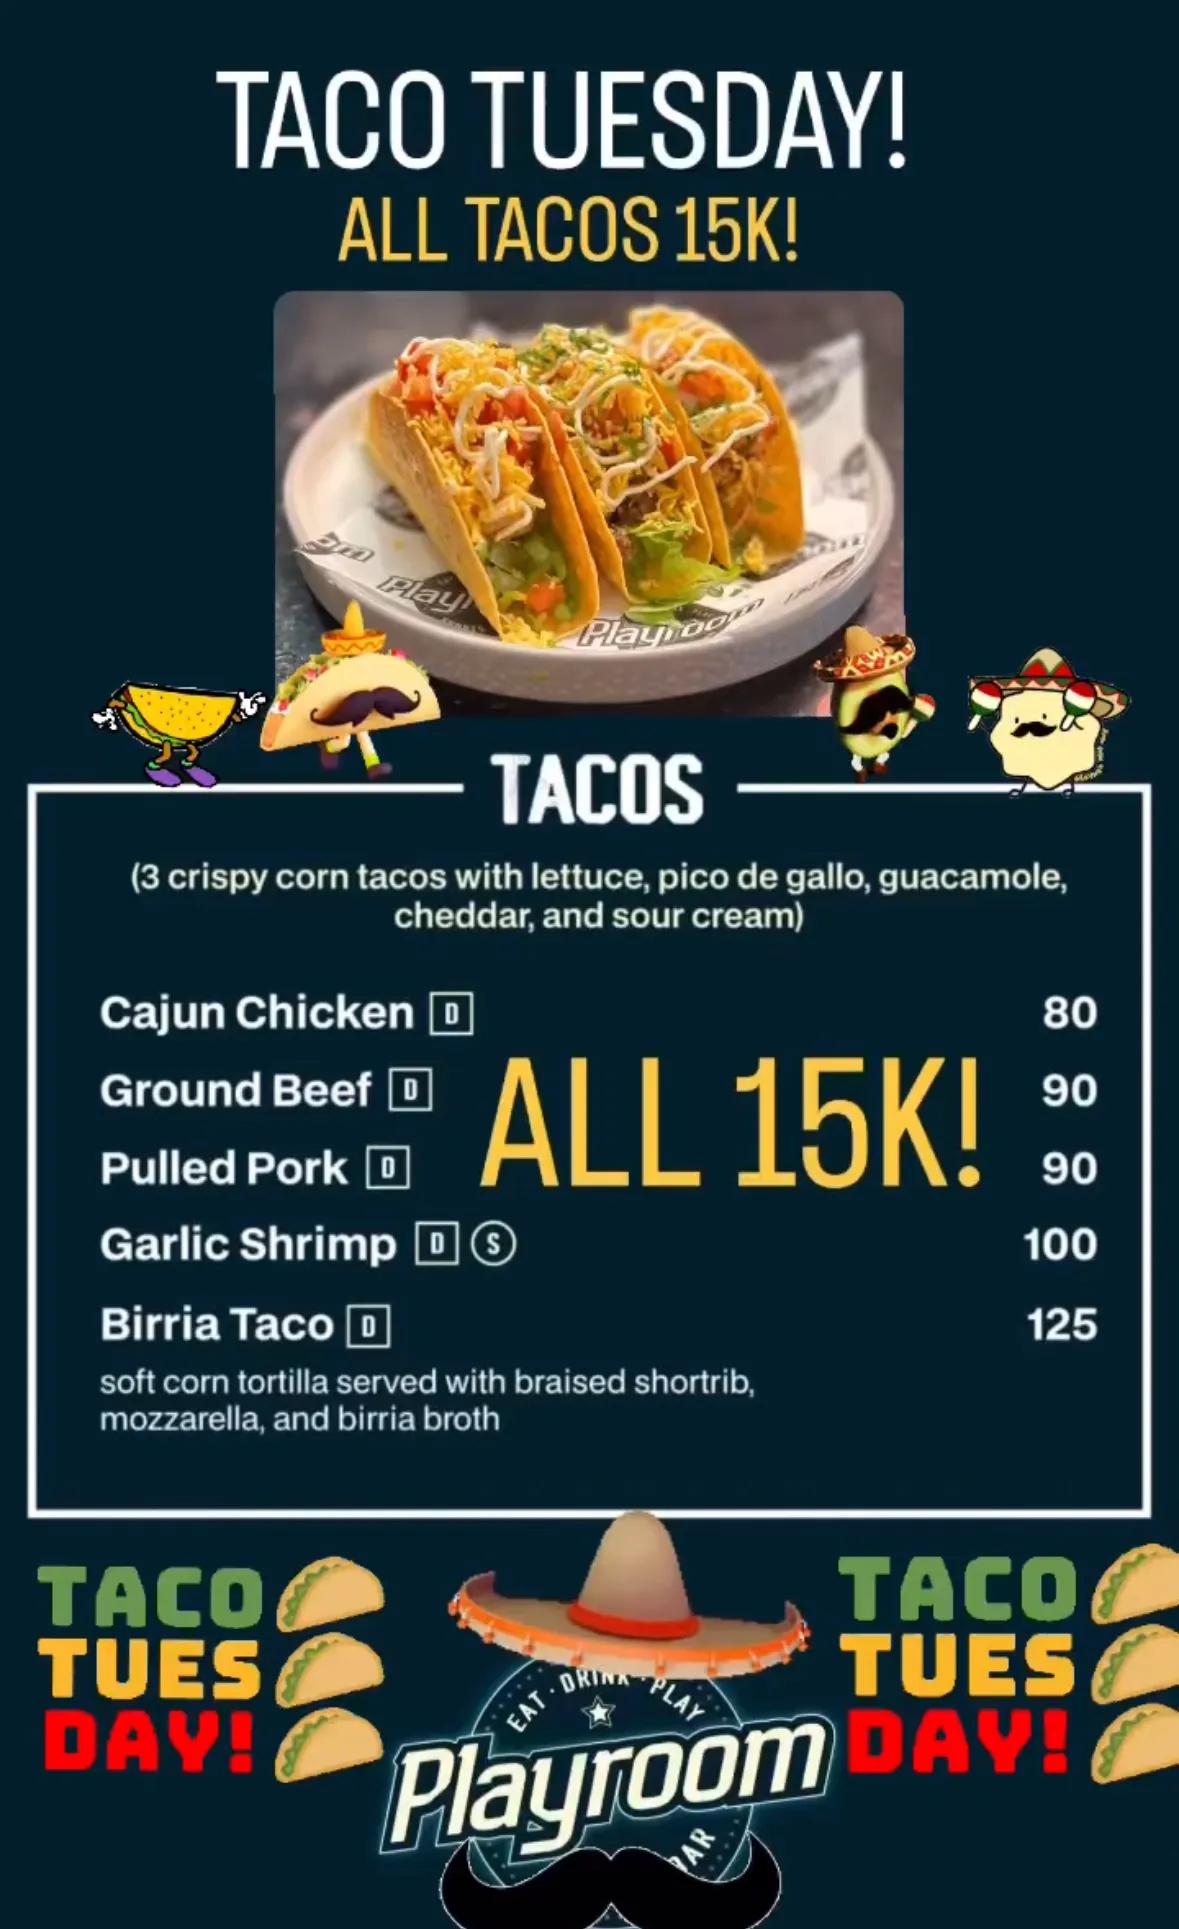 Event at Playroom every Tuesday 2024: Taco Tuesday!